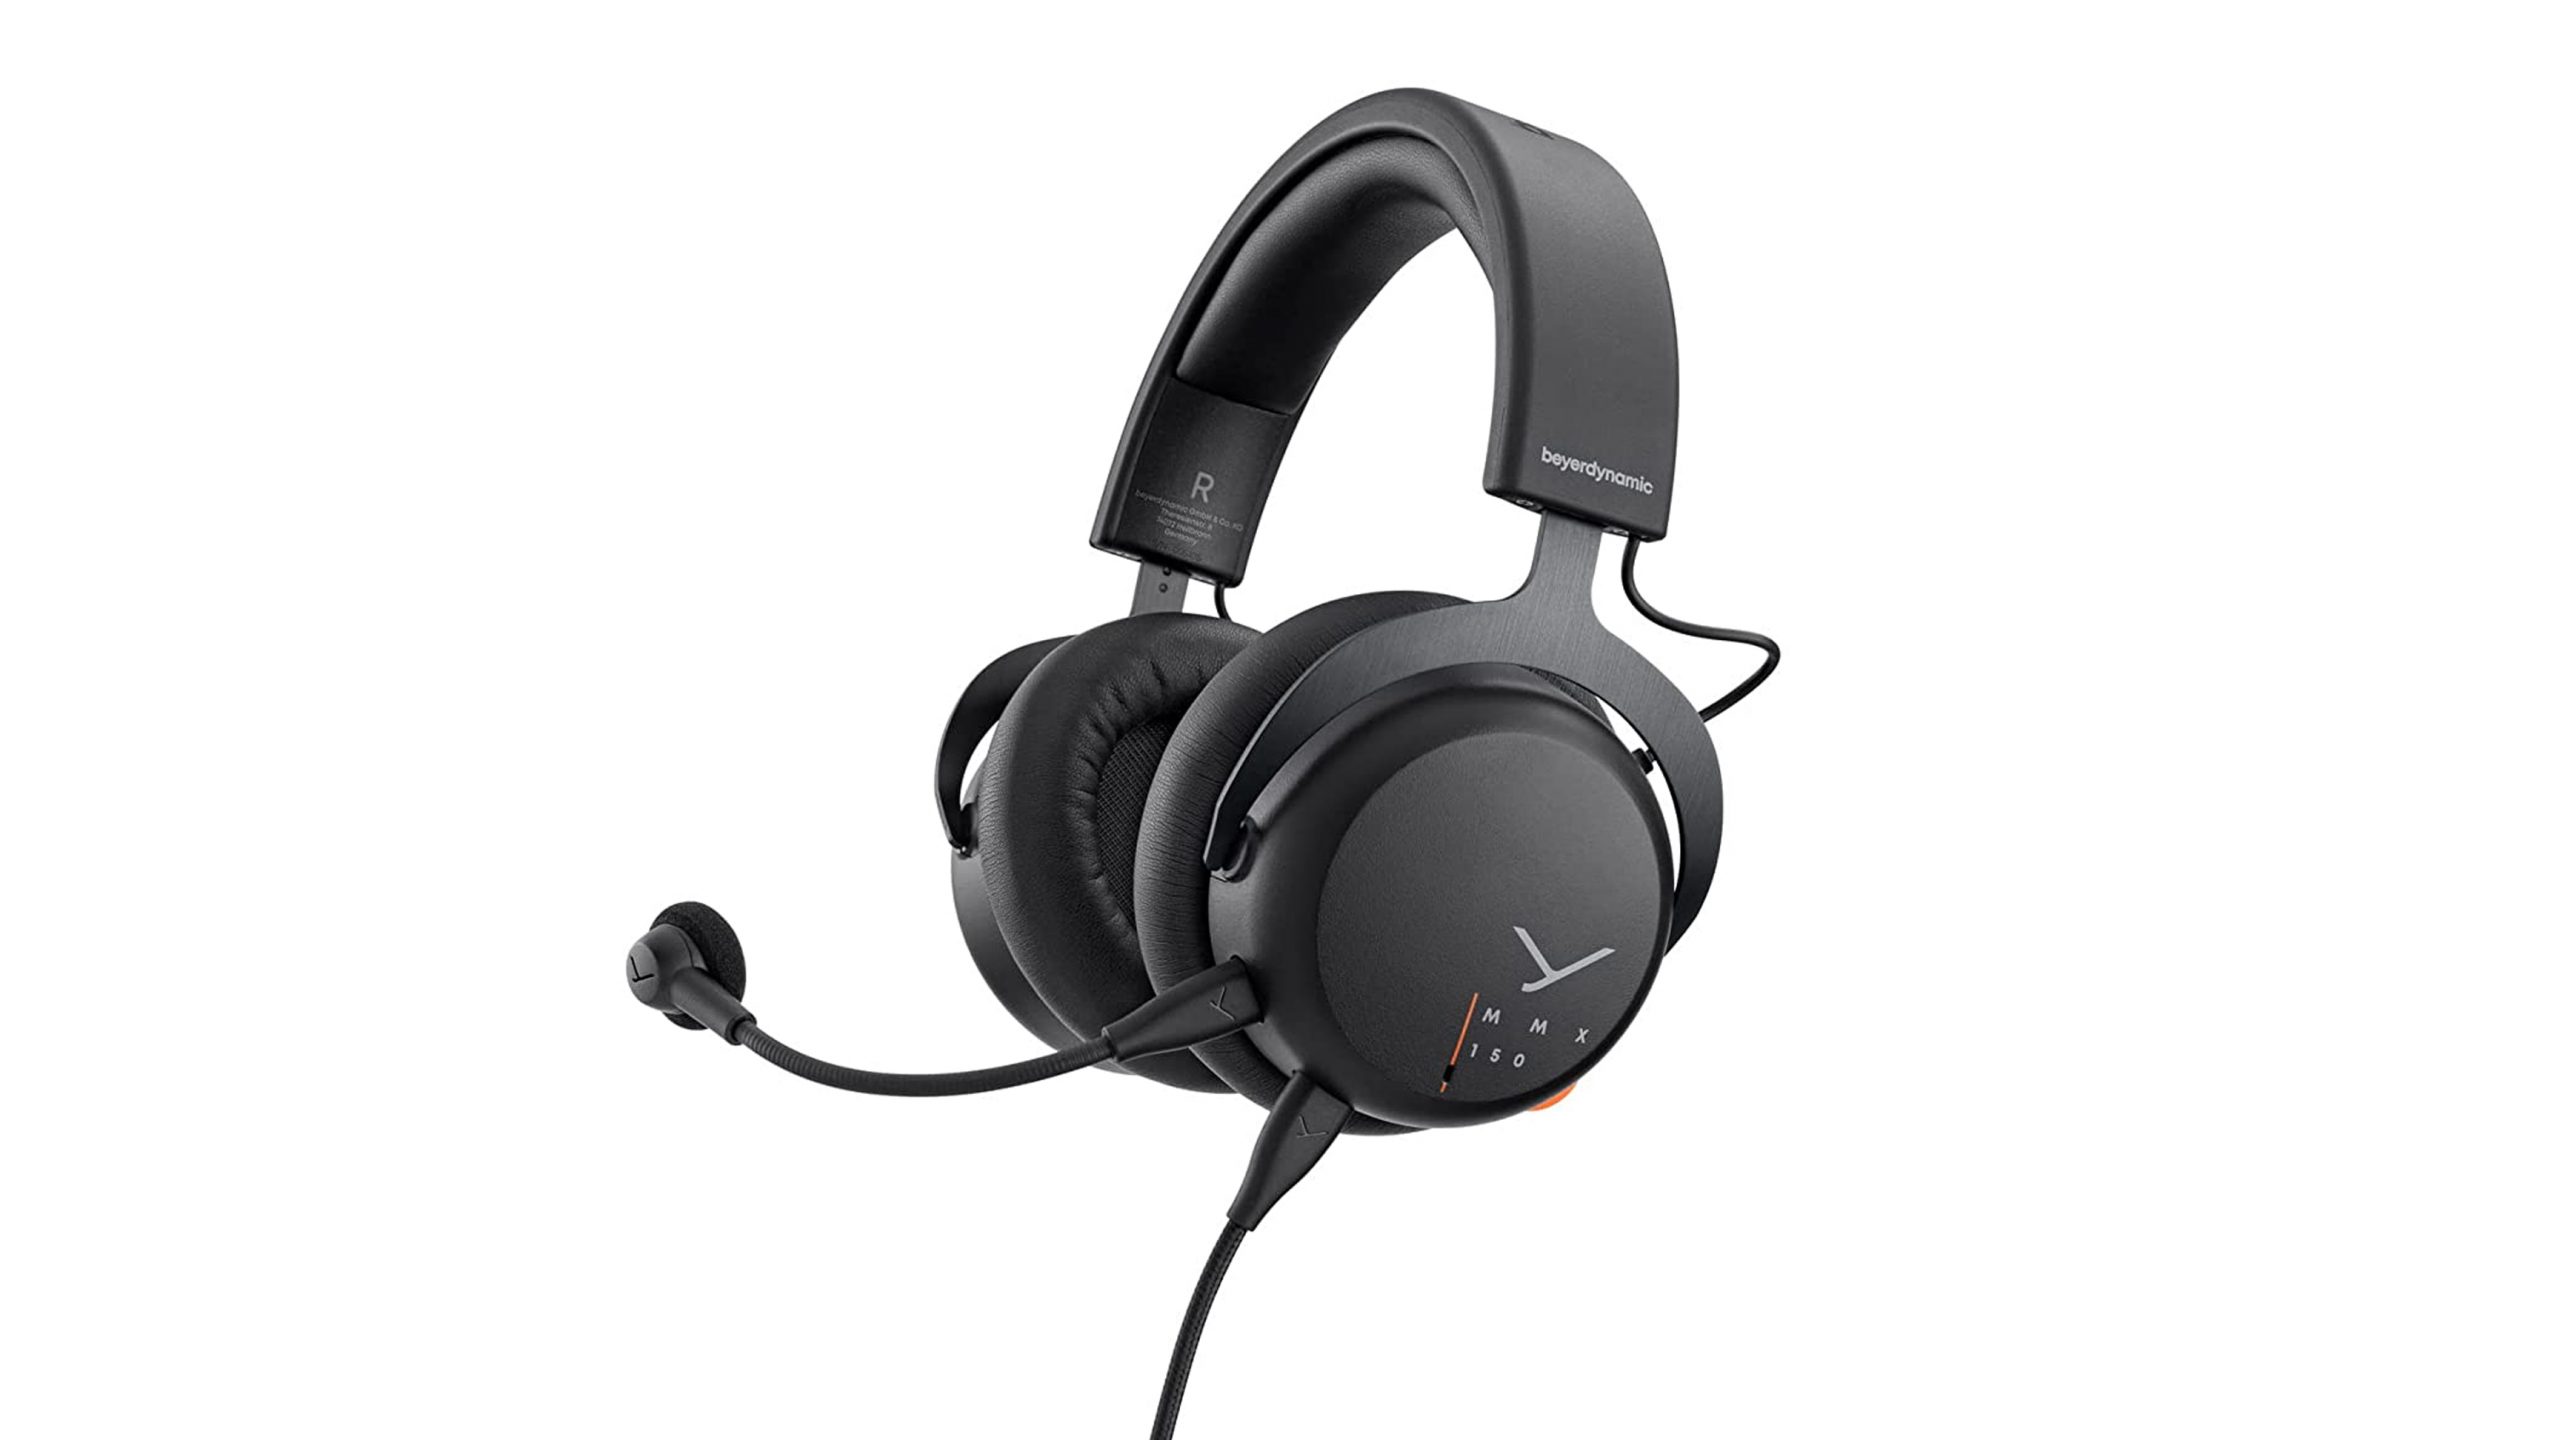 The Beyerdynamic MMX 150 gaming headset in black against a white background.